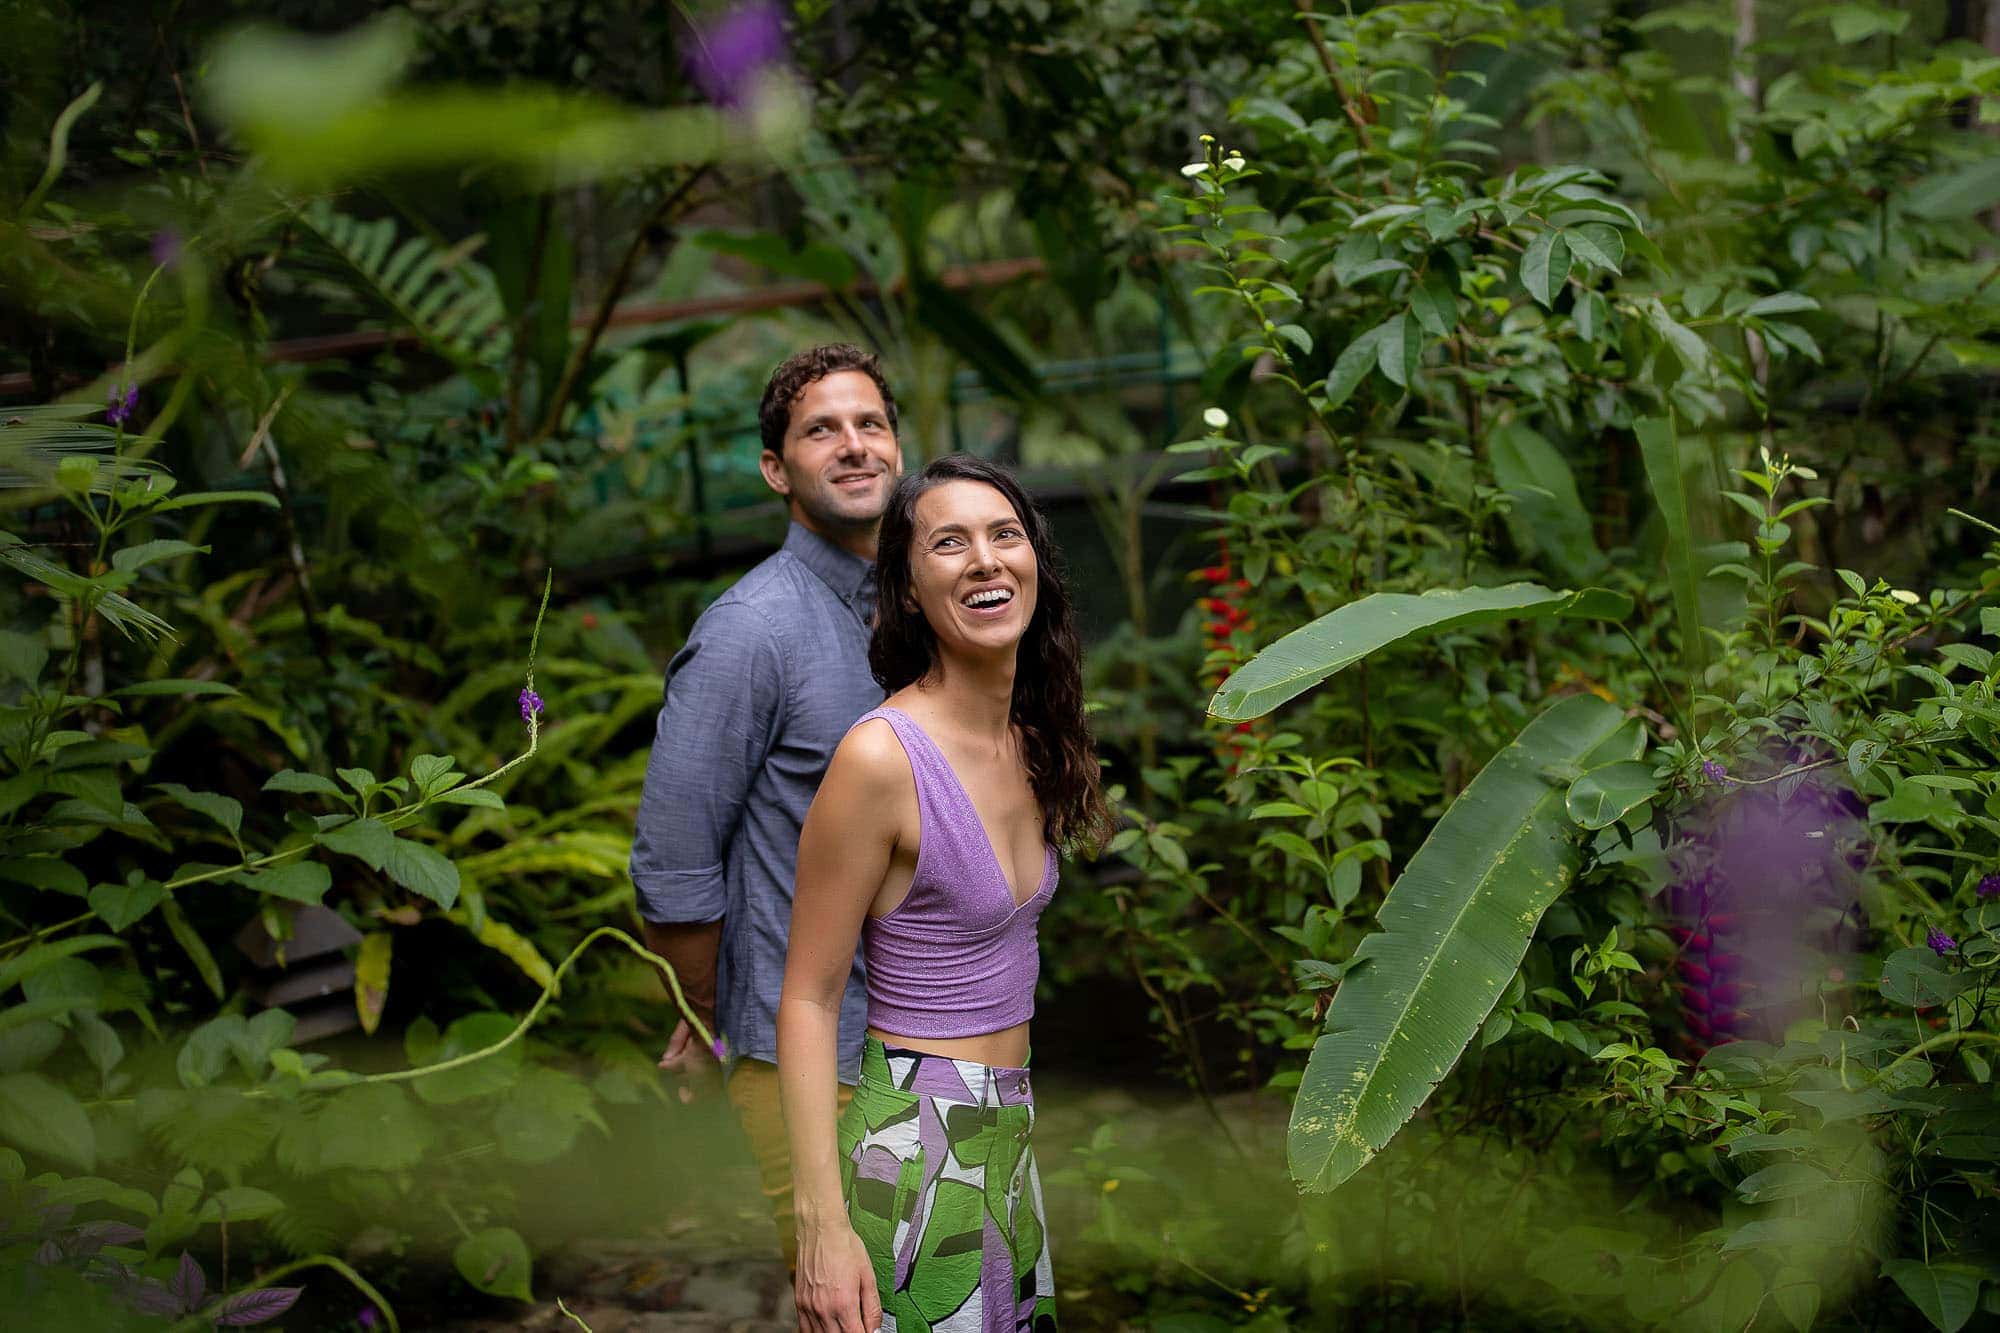 walking through the rainforest together